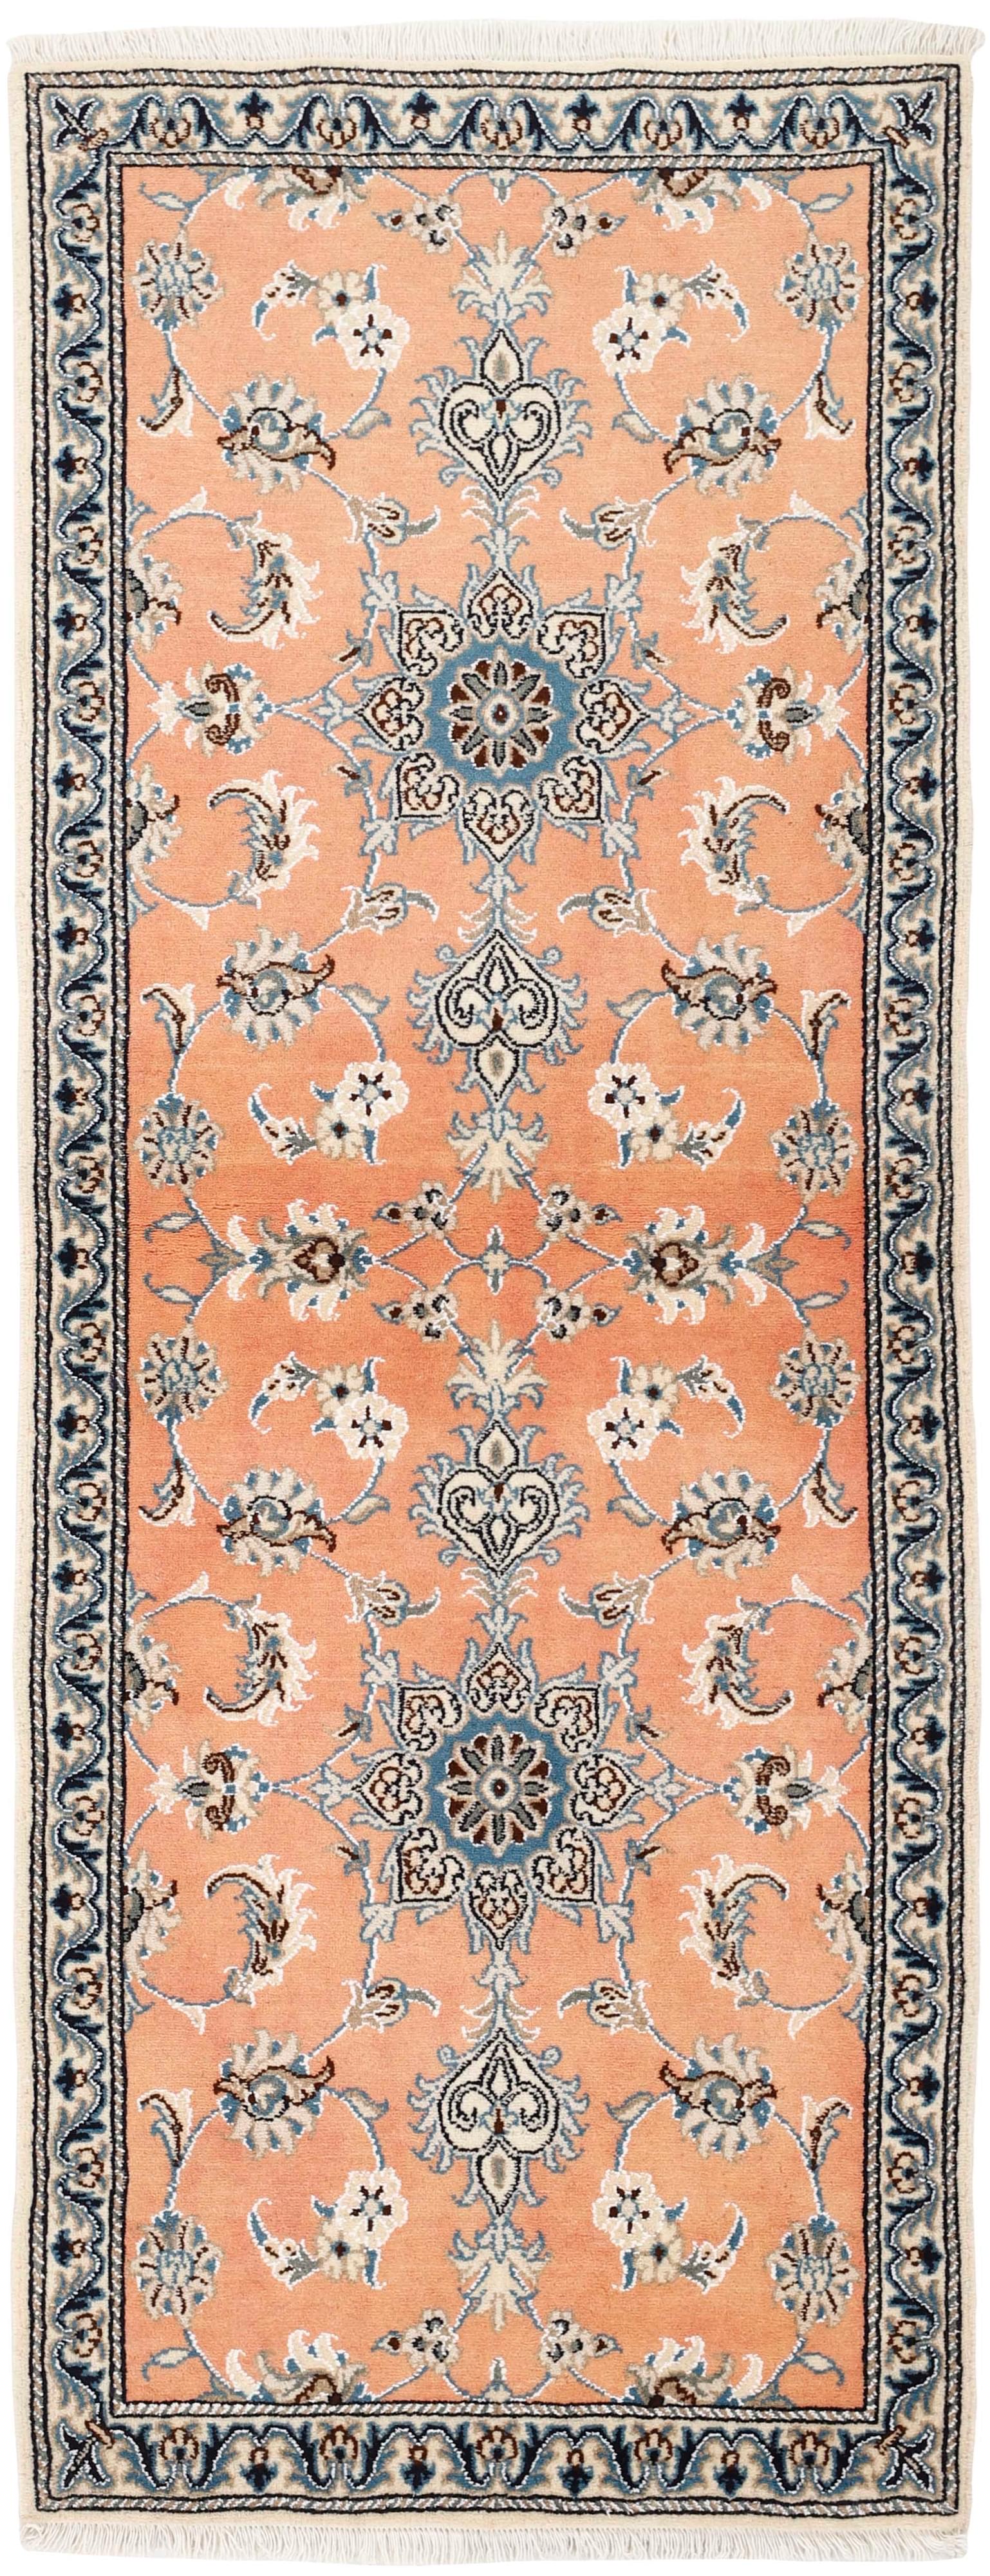 authentic persian runner with pink and cream floral design